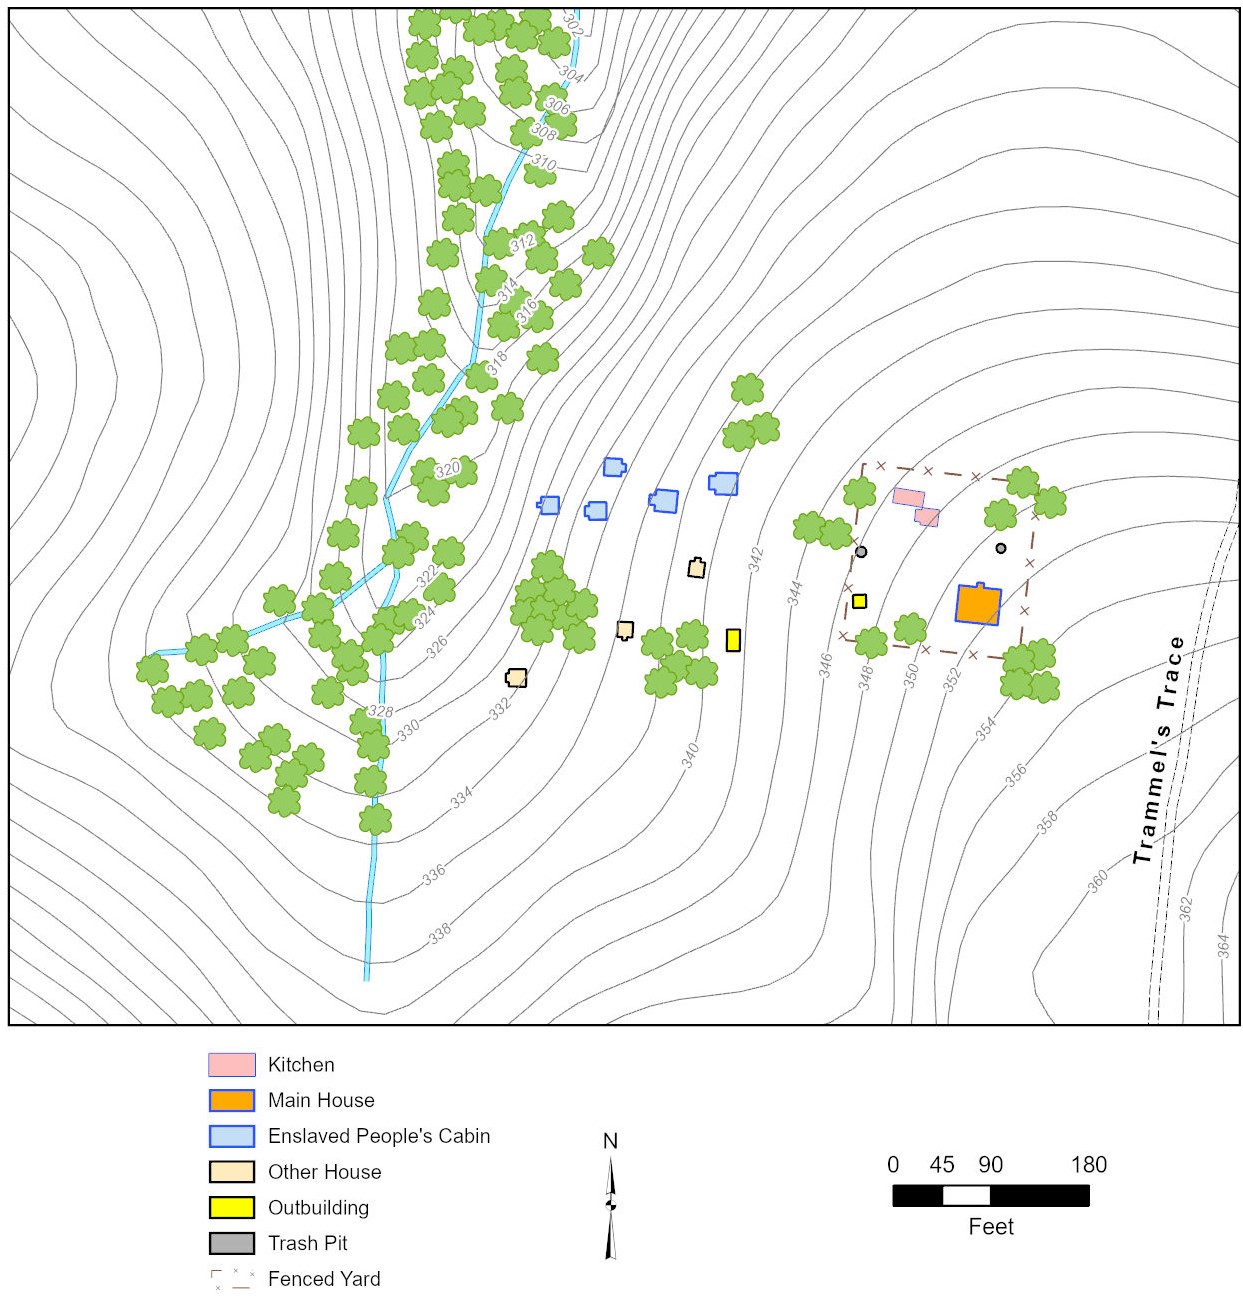 GIS map with the outlines of buildings and archeological features on topographic lines with a blue creek and green tree symbols. At the bottom of the map is a legend, scale bar, and a north arrow.